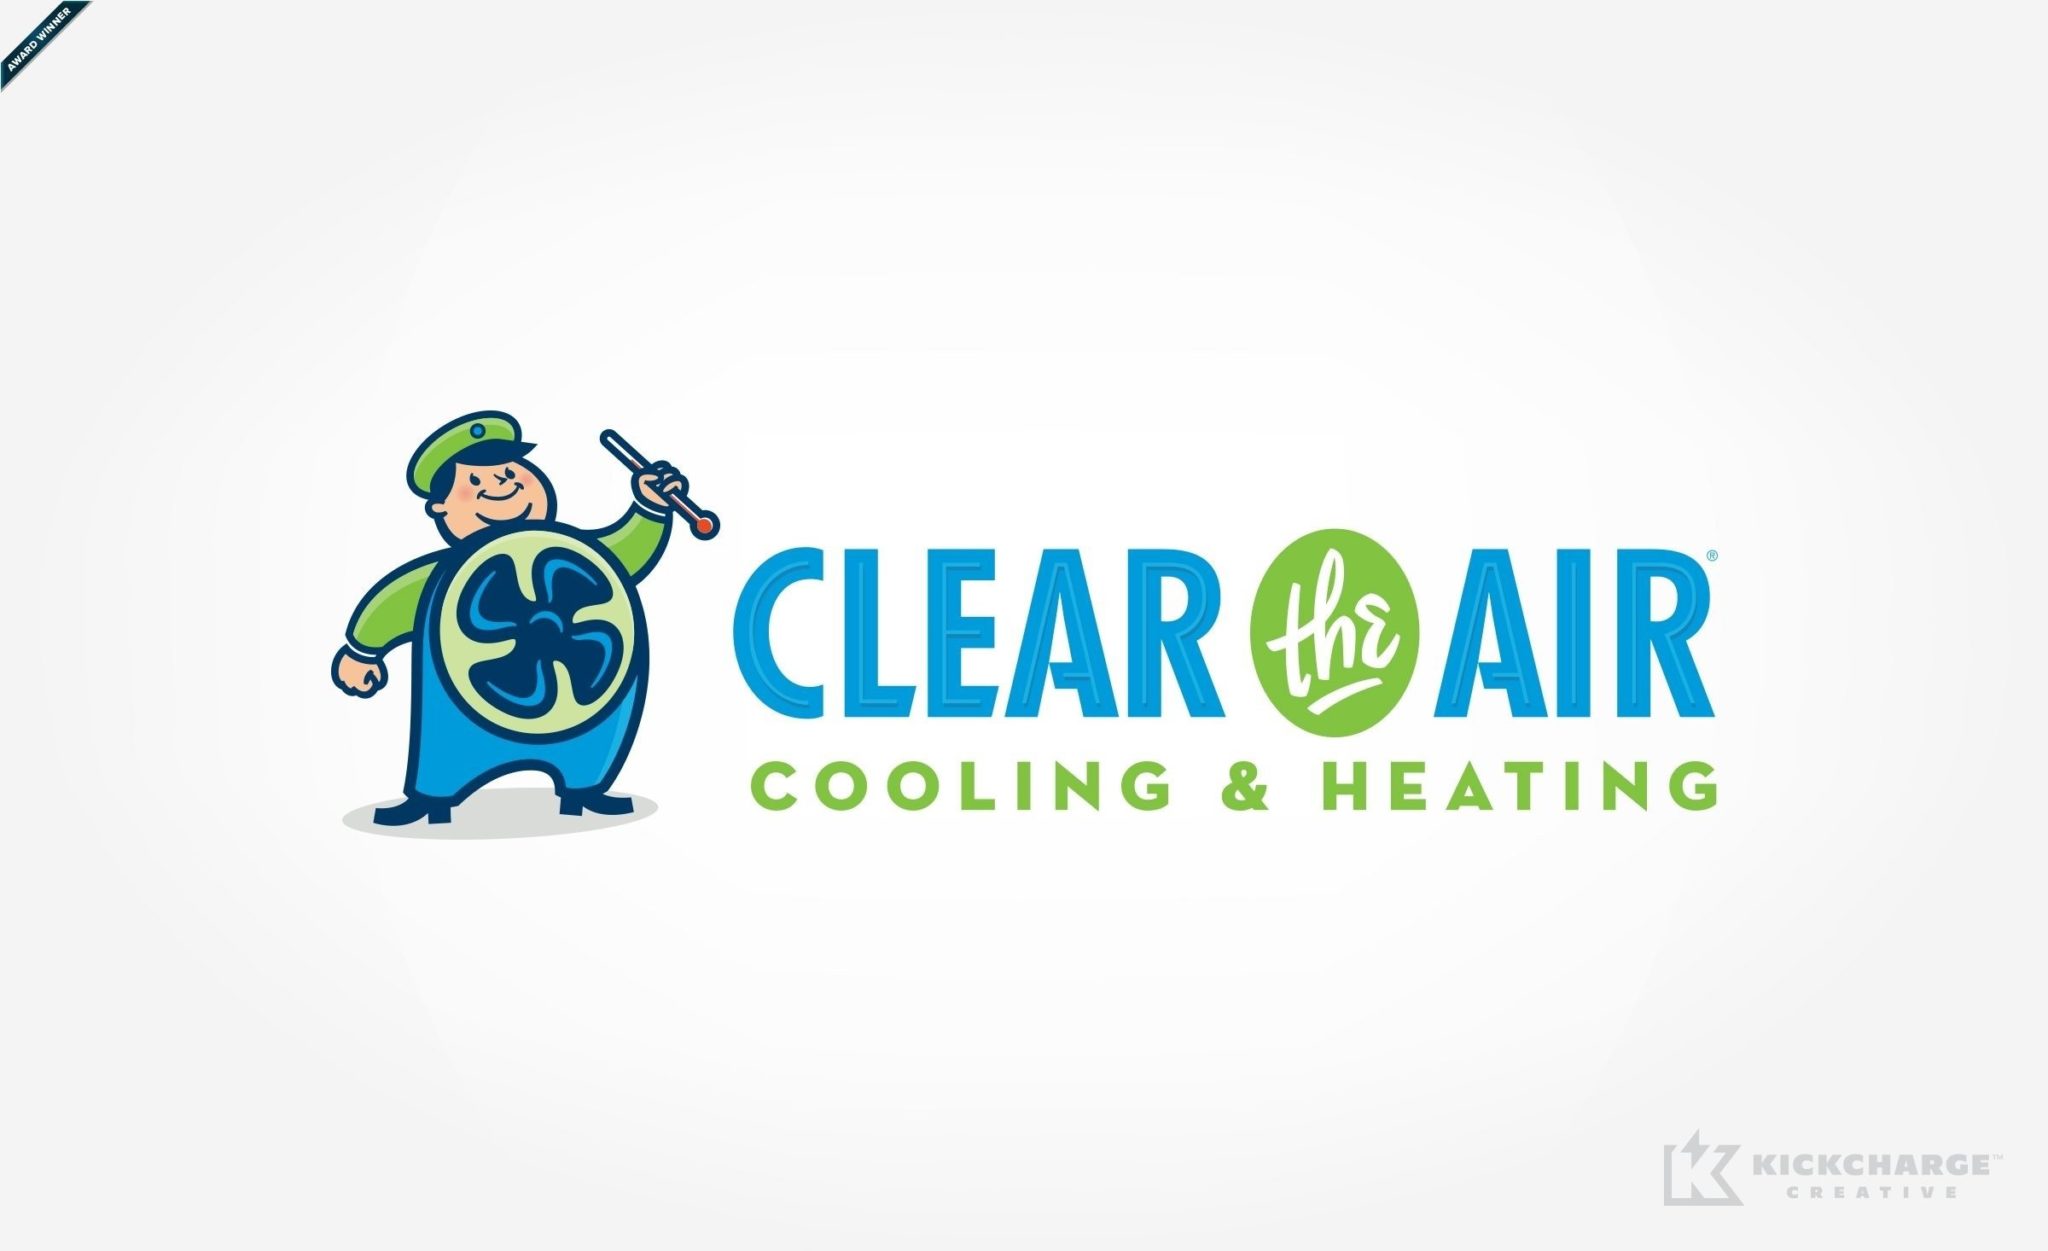 Clear the Air Cooling & Heating